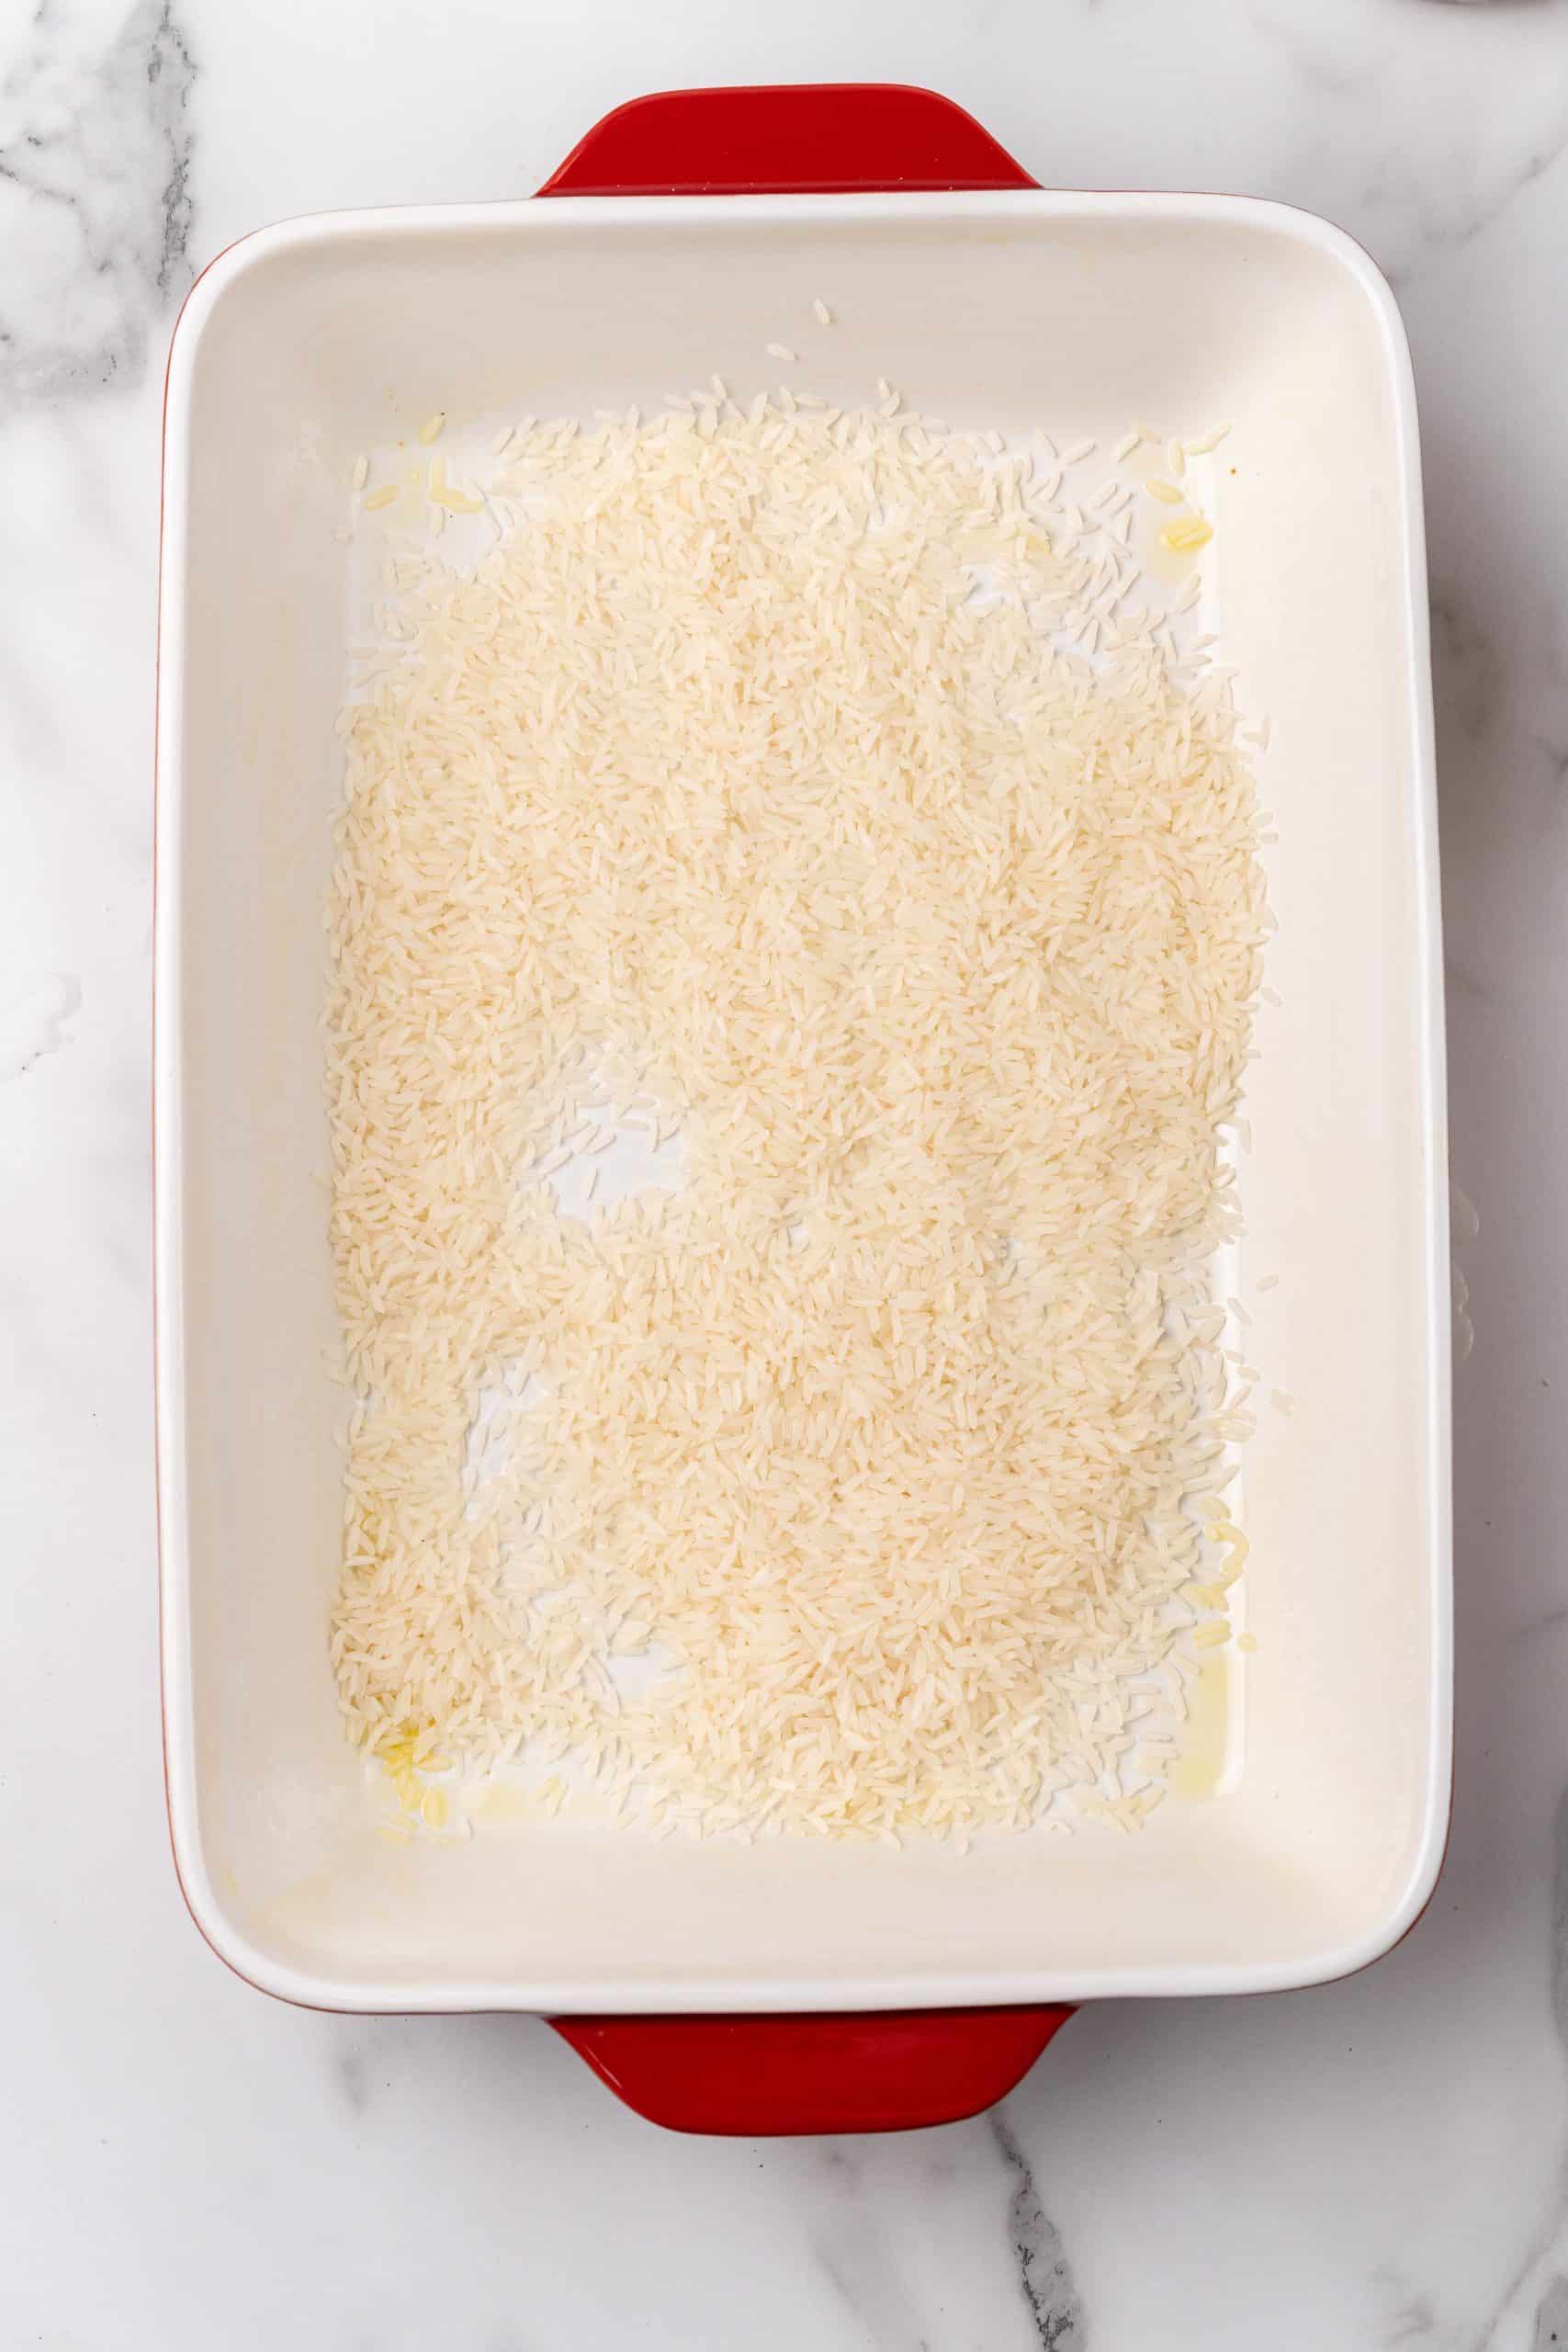 rice grains spread in a baking dish